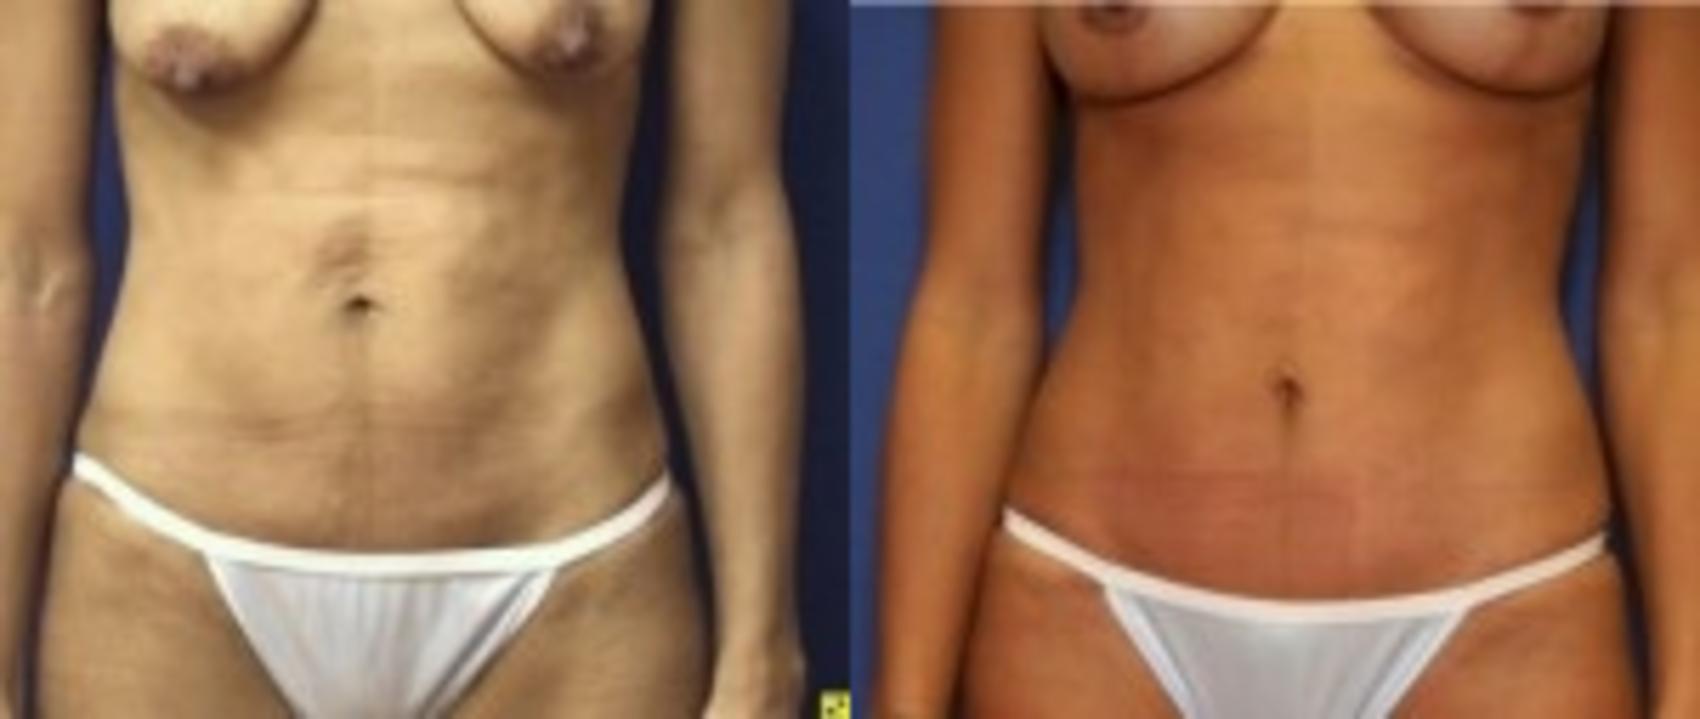 Before & After Tummy Tuck Case 248 Front View in Ann Arbor, MI